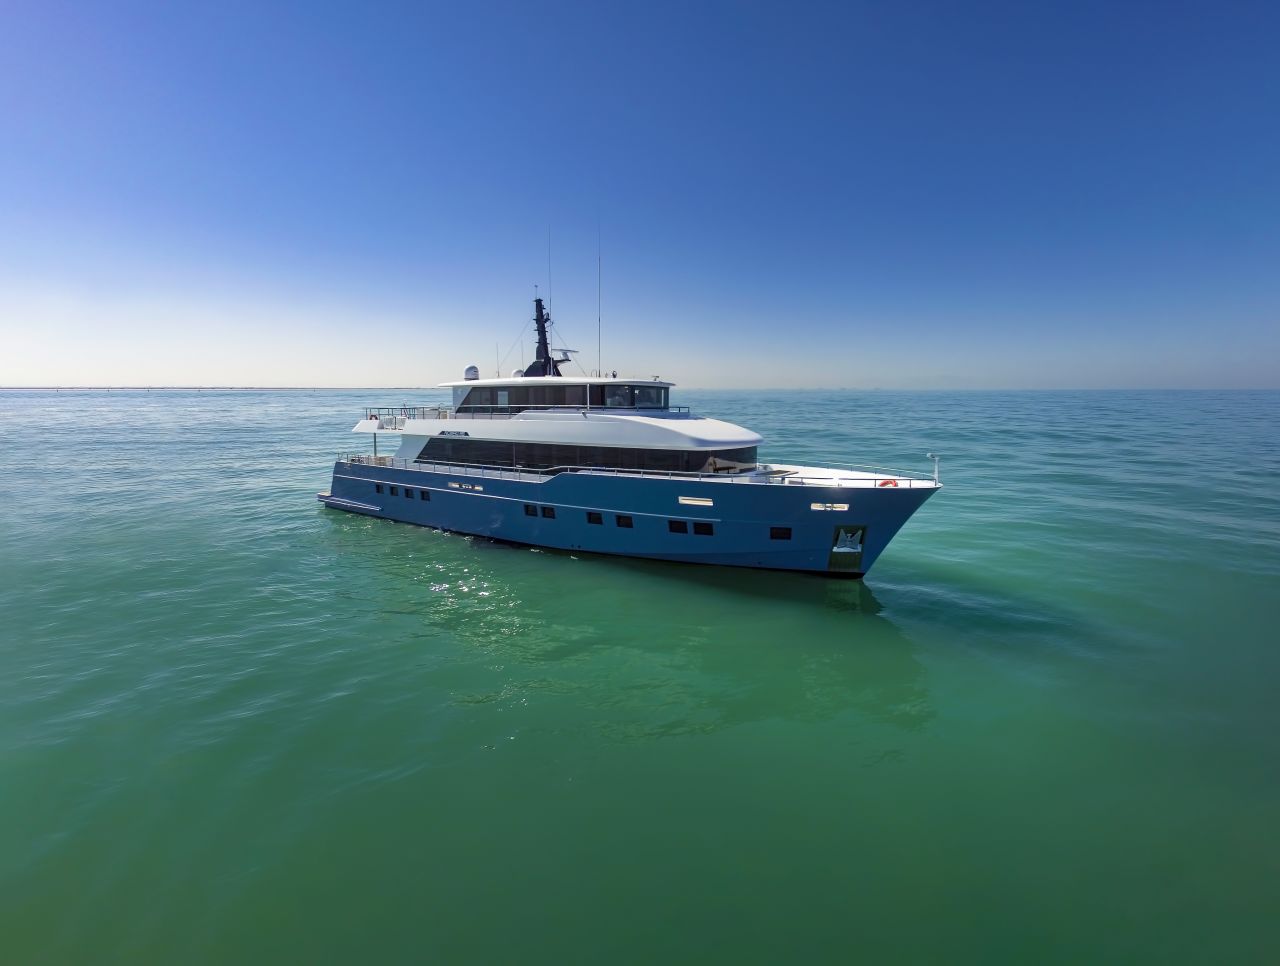 Gulf Craft also introduced a range of yachts with solar panels, following an initiative to make family yachting more environmentally friendly. 